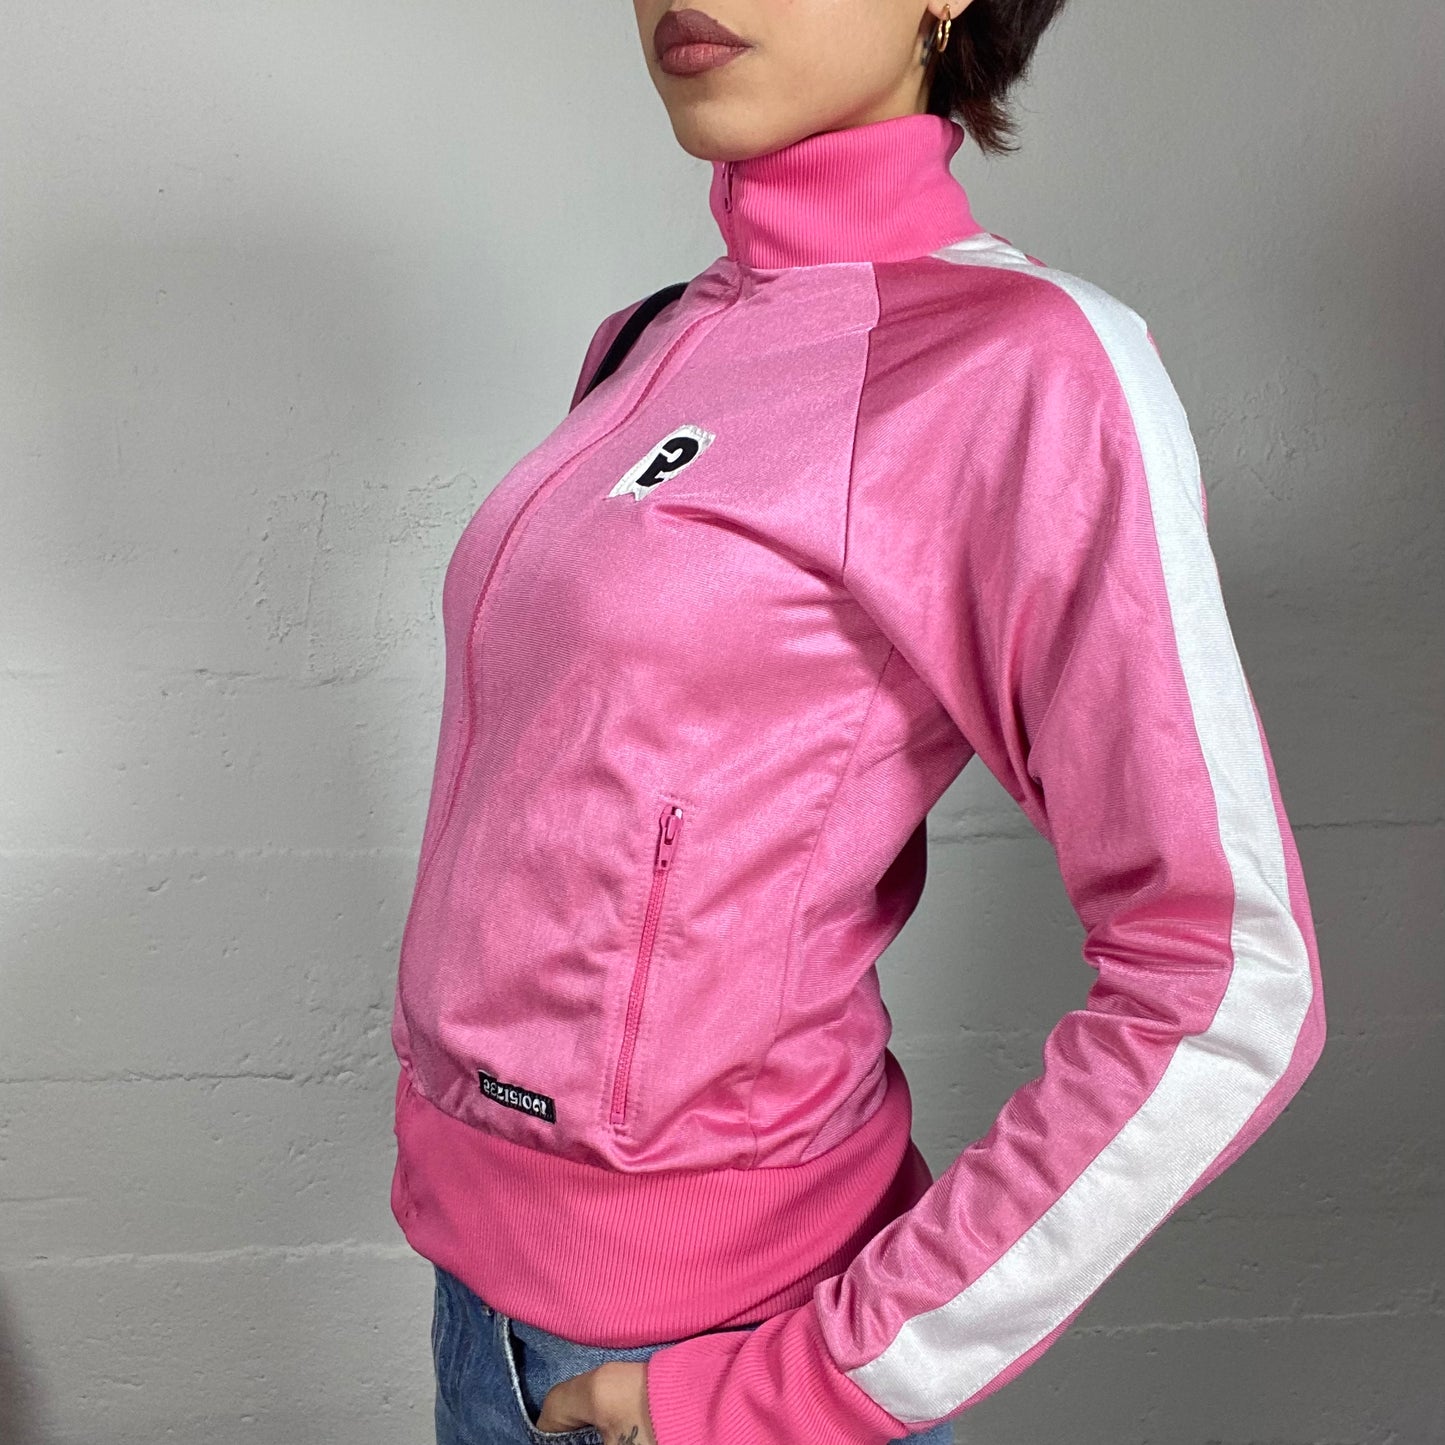 Vintage 2000's Downtown Girl Pink Zip Up Jacket with White Trim Detail (S)